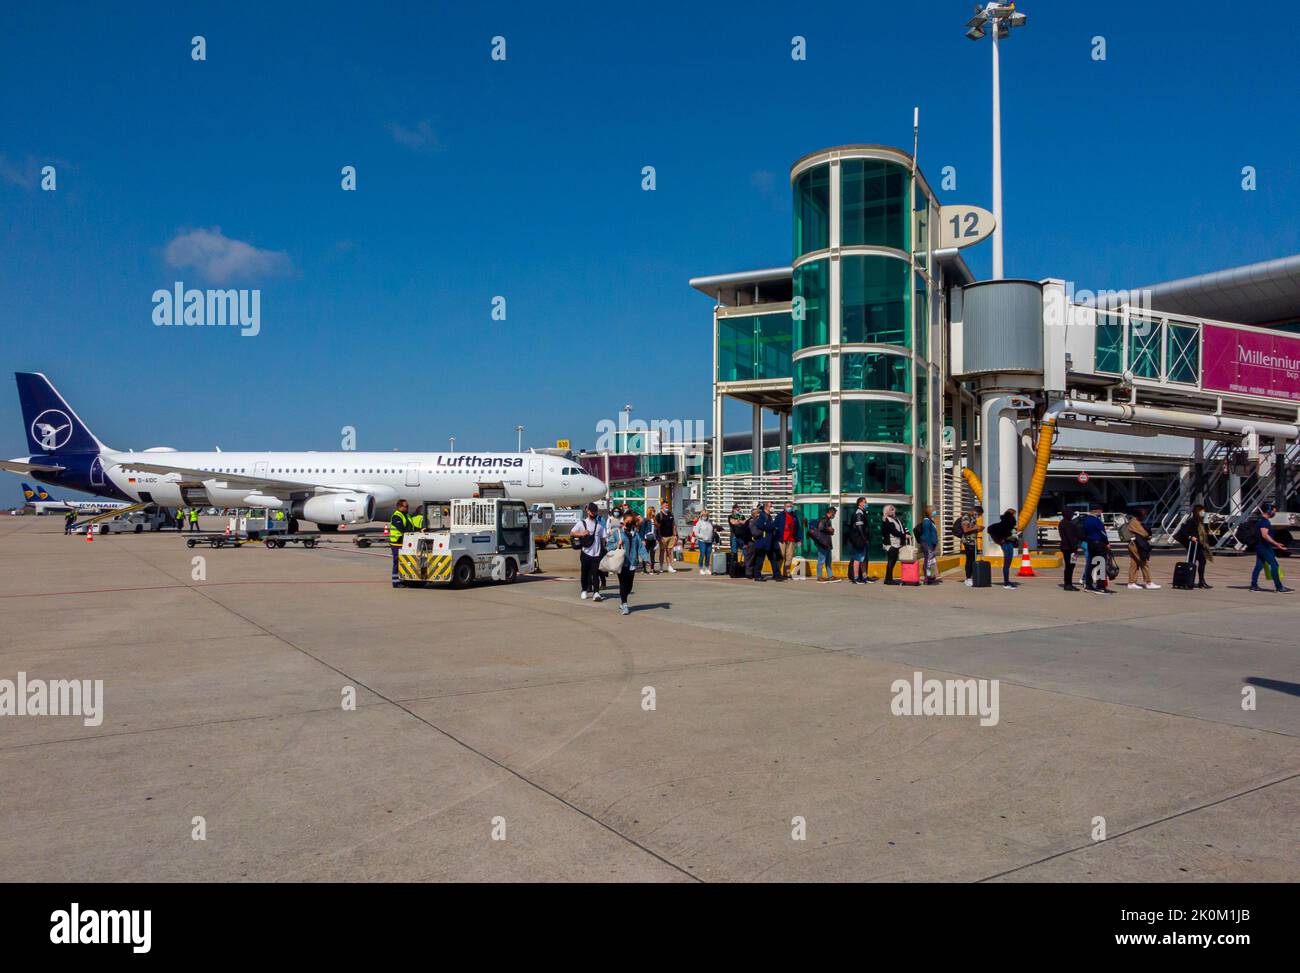 Passengers on tarmac next to a Lufthansa airbus aircraft at Porto airport in Portugal. Stock Photo